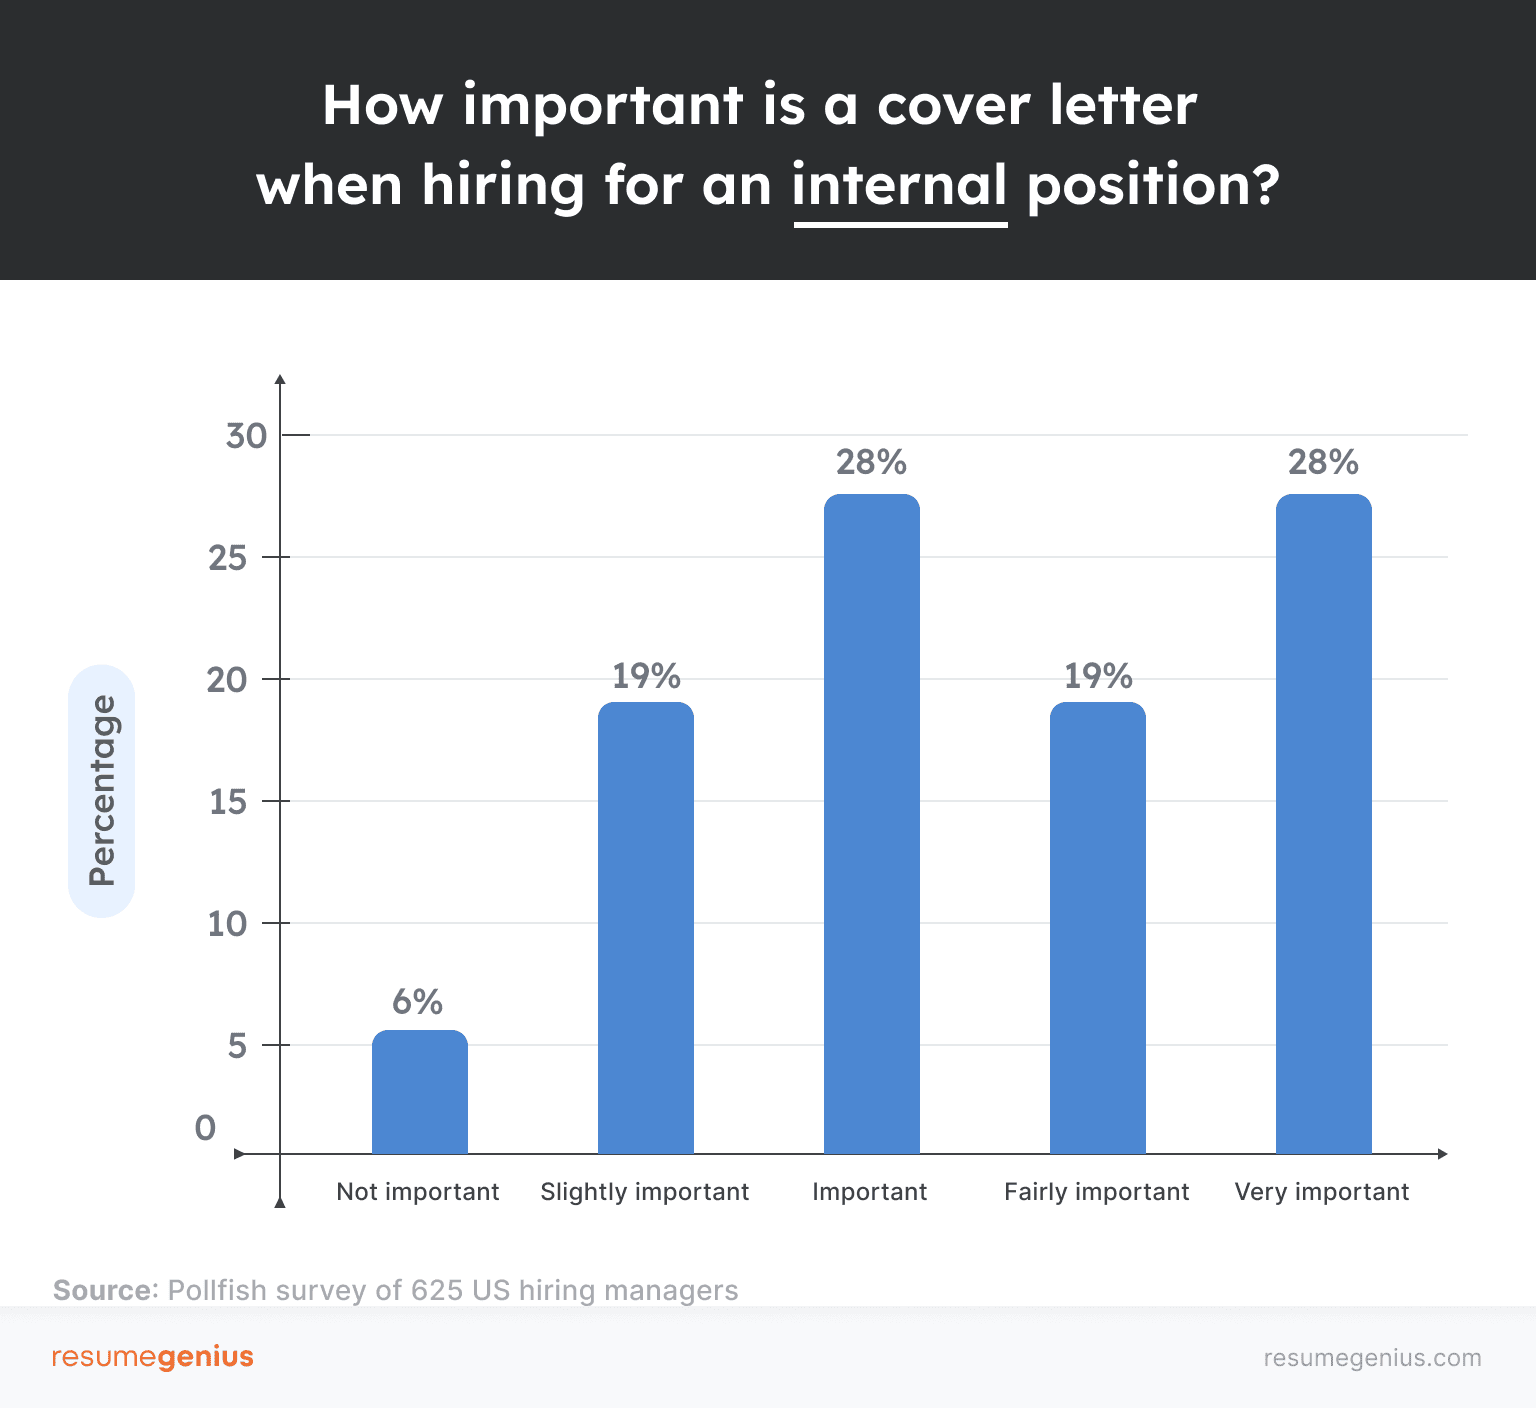 Hiring managers separated by how important they view cover letters when hiring for an internal position